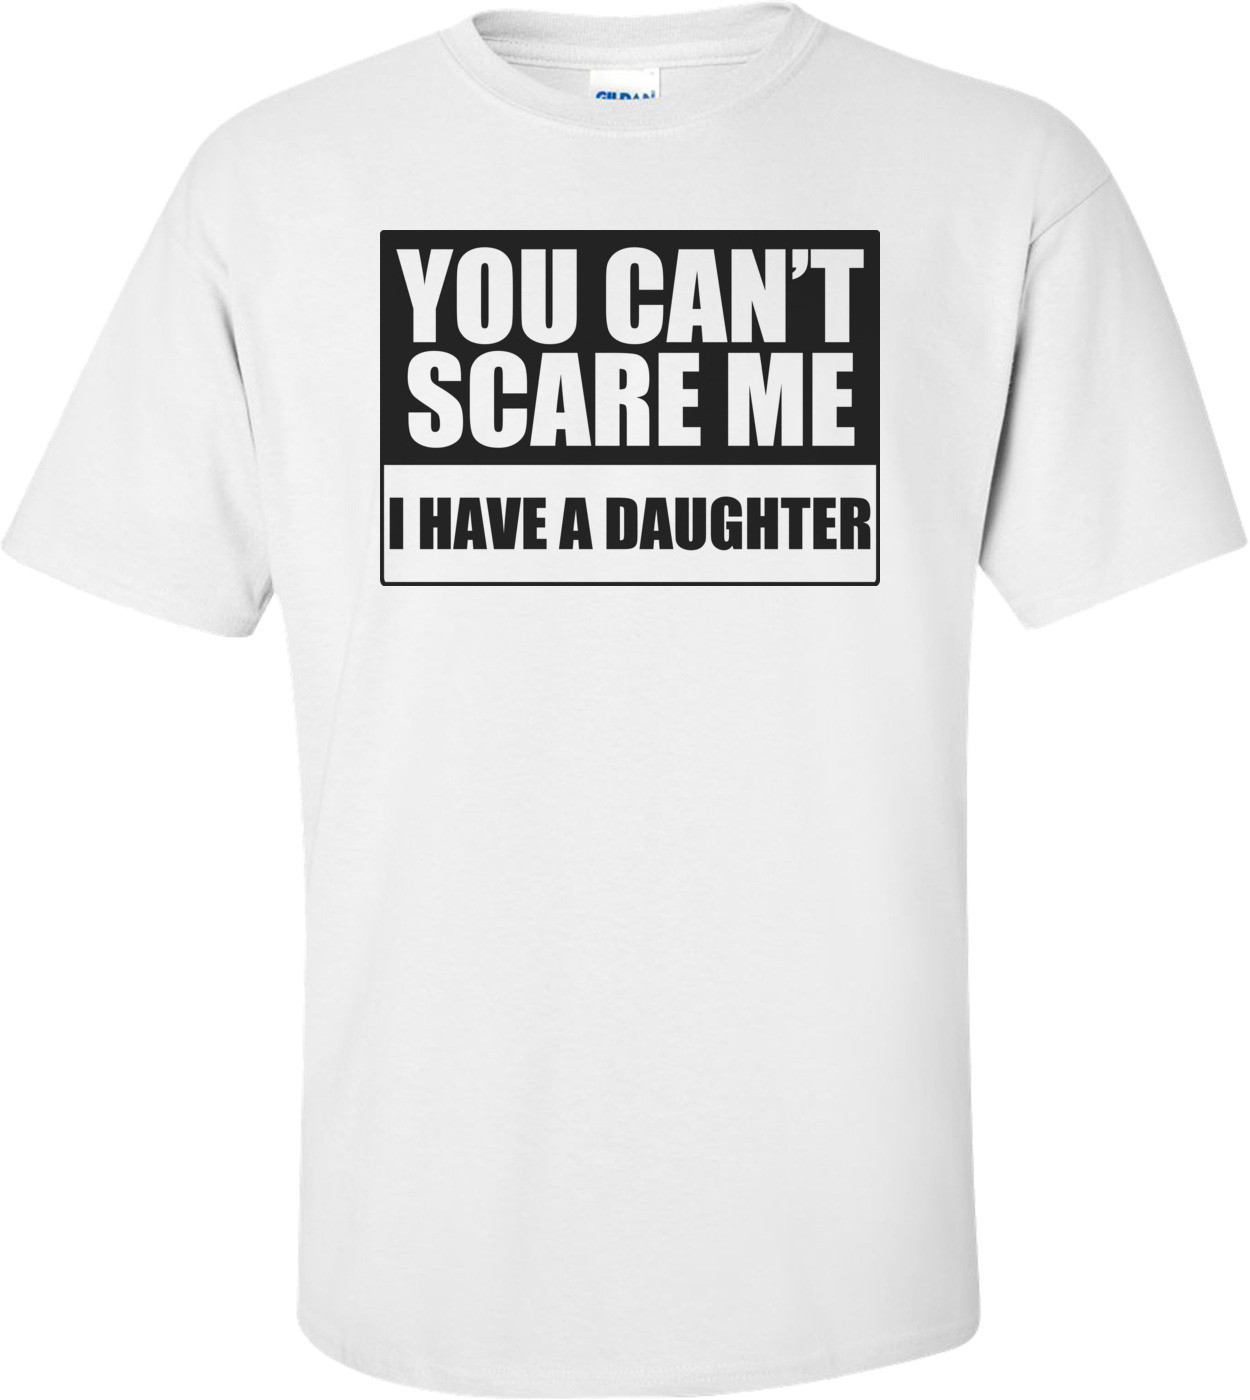 You Can't Scare Me, I Have A Daughter Funny Shirt